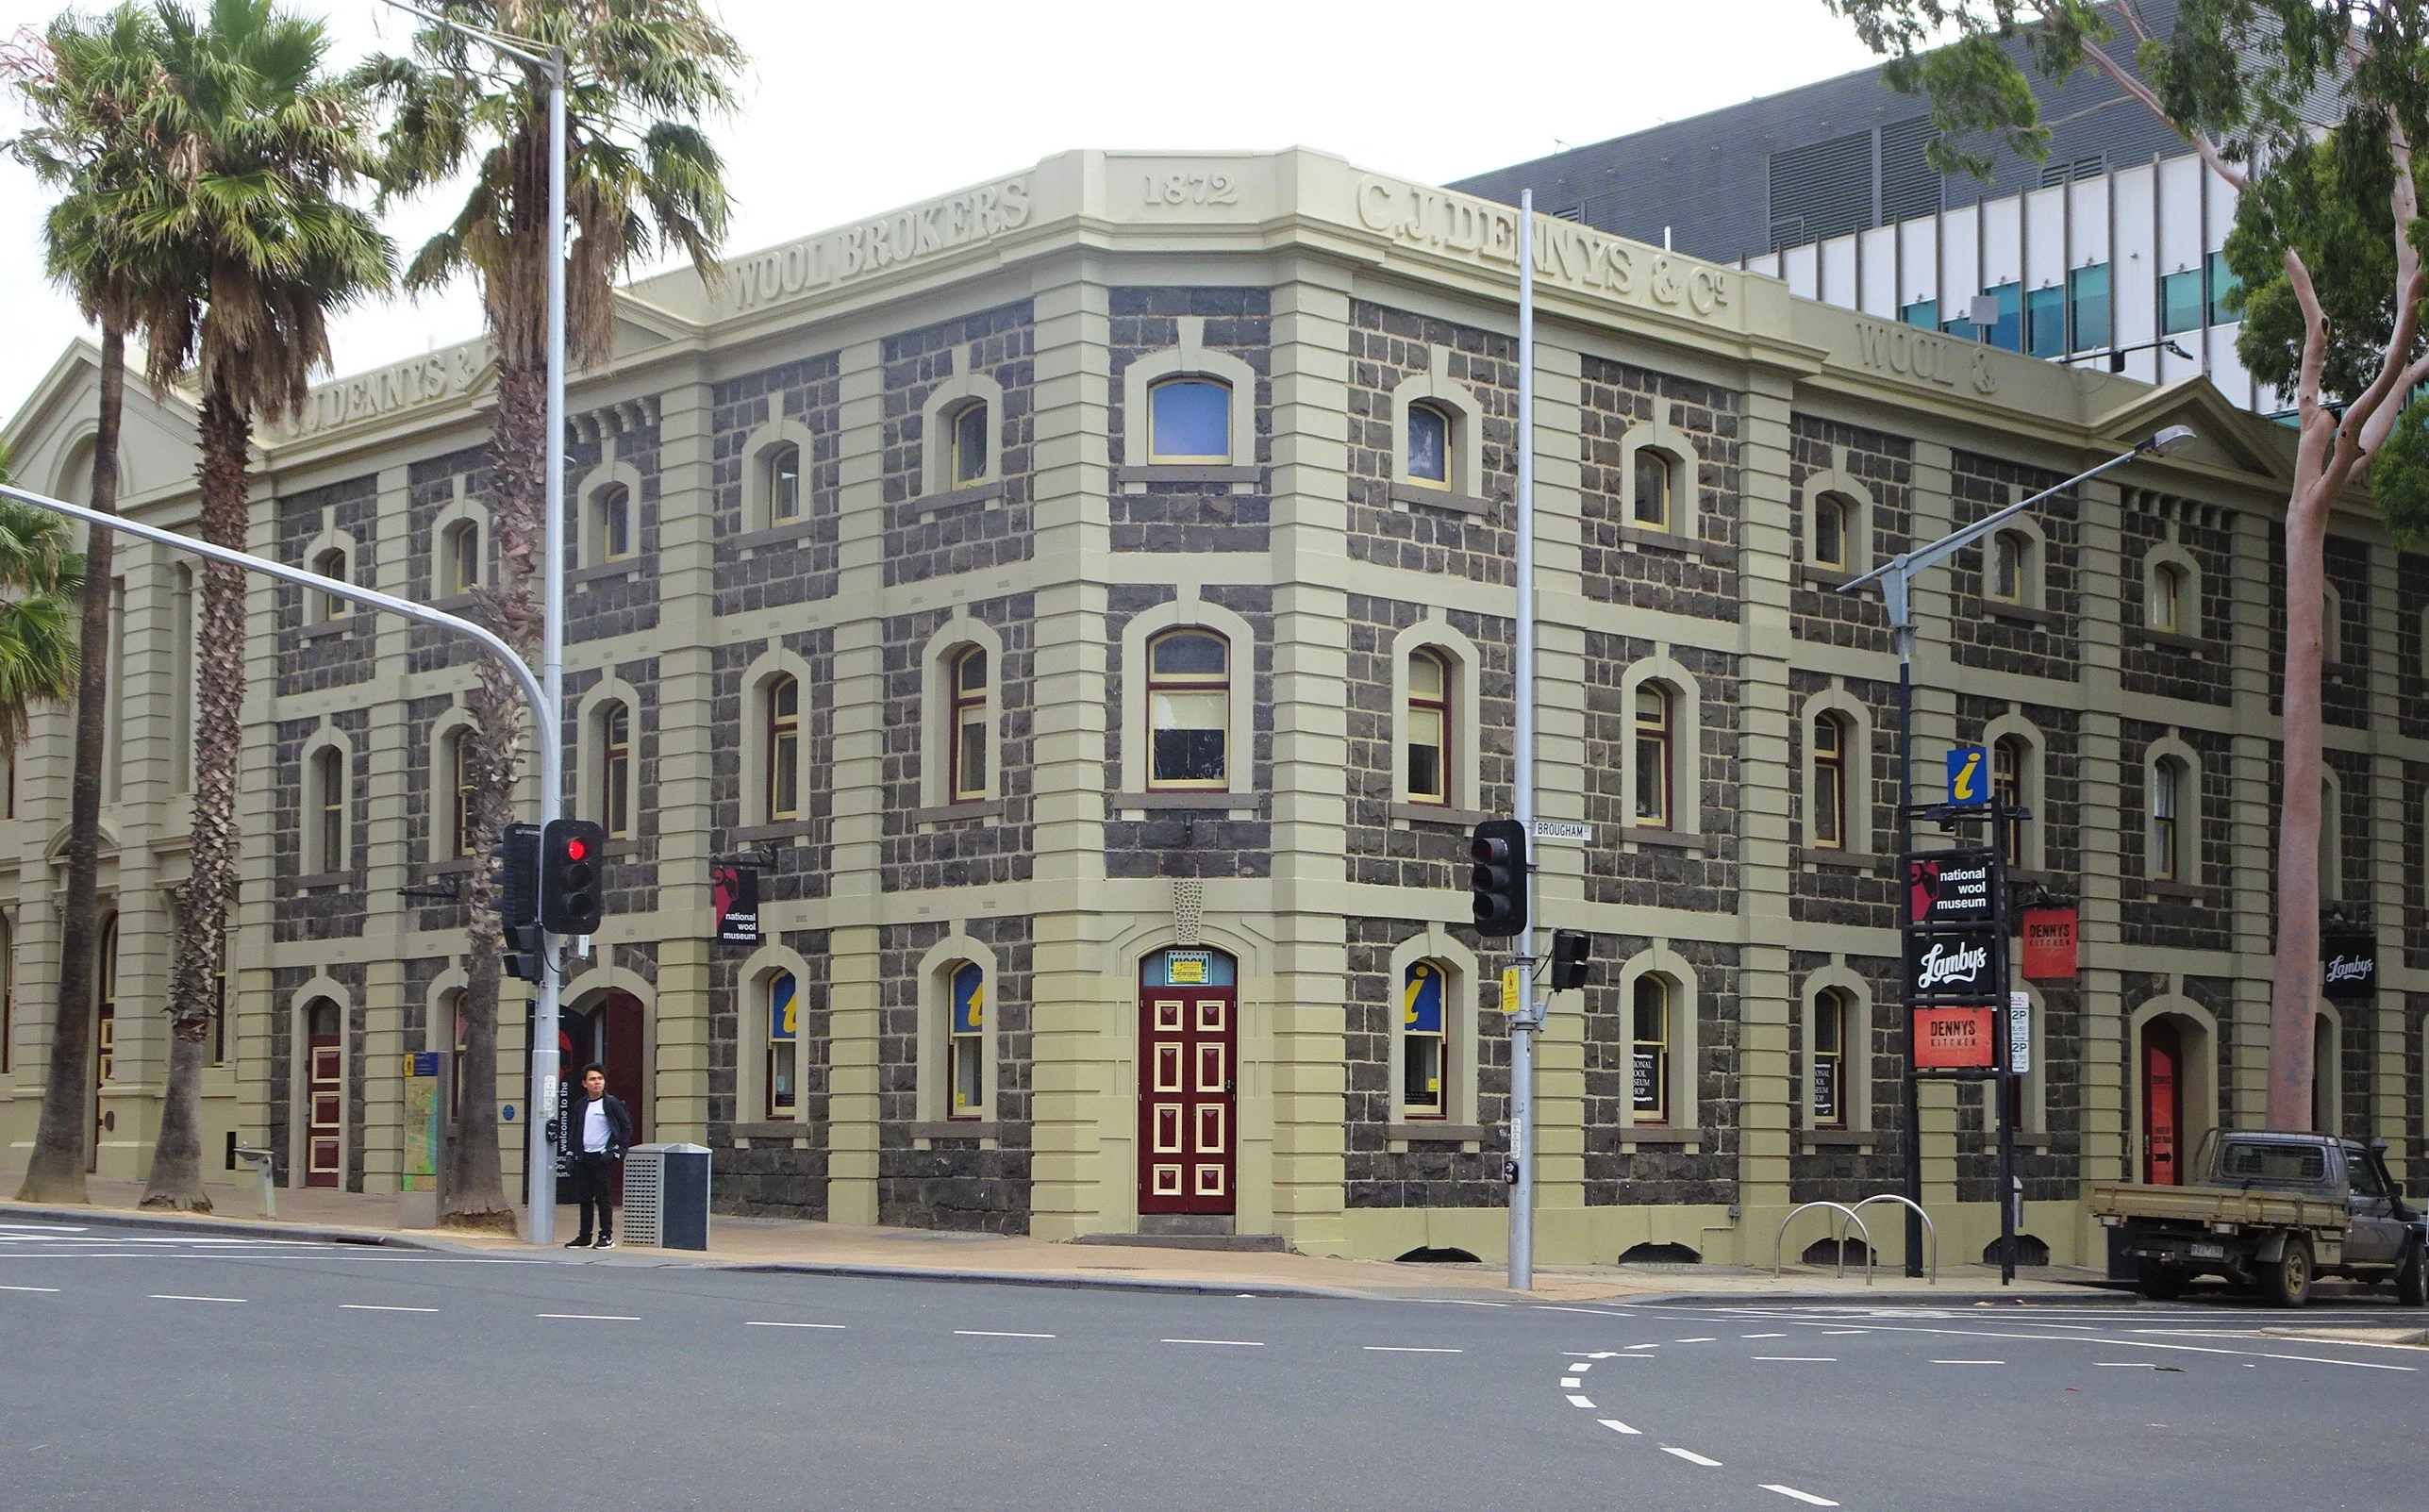 The facade of the National Wool Museum from across the junction. Geelong, Victoria.